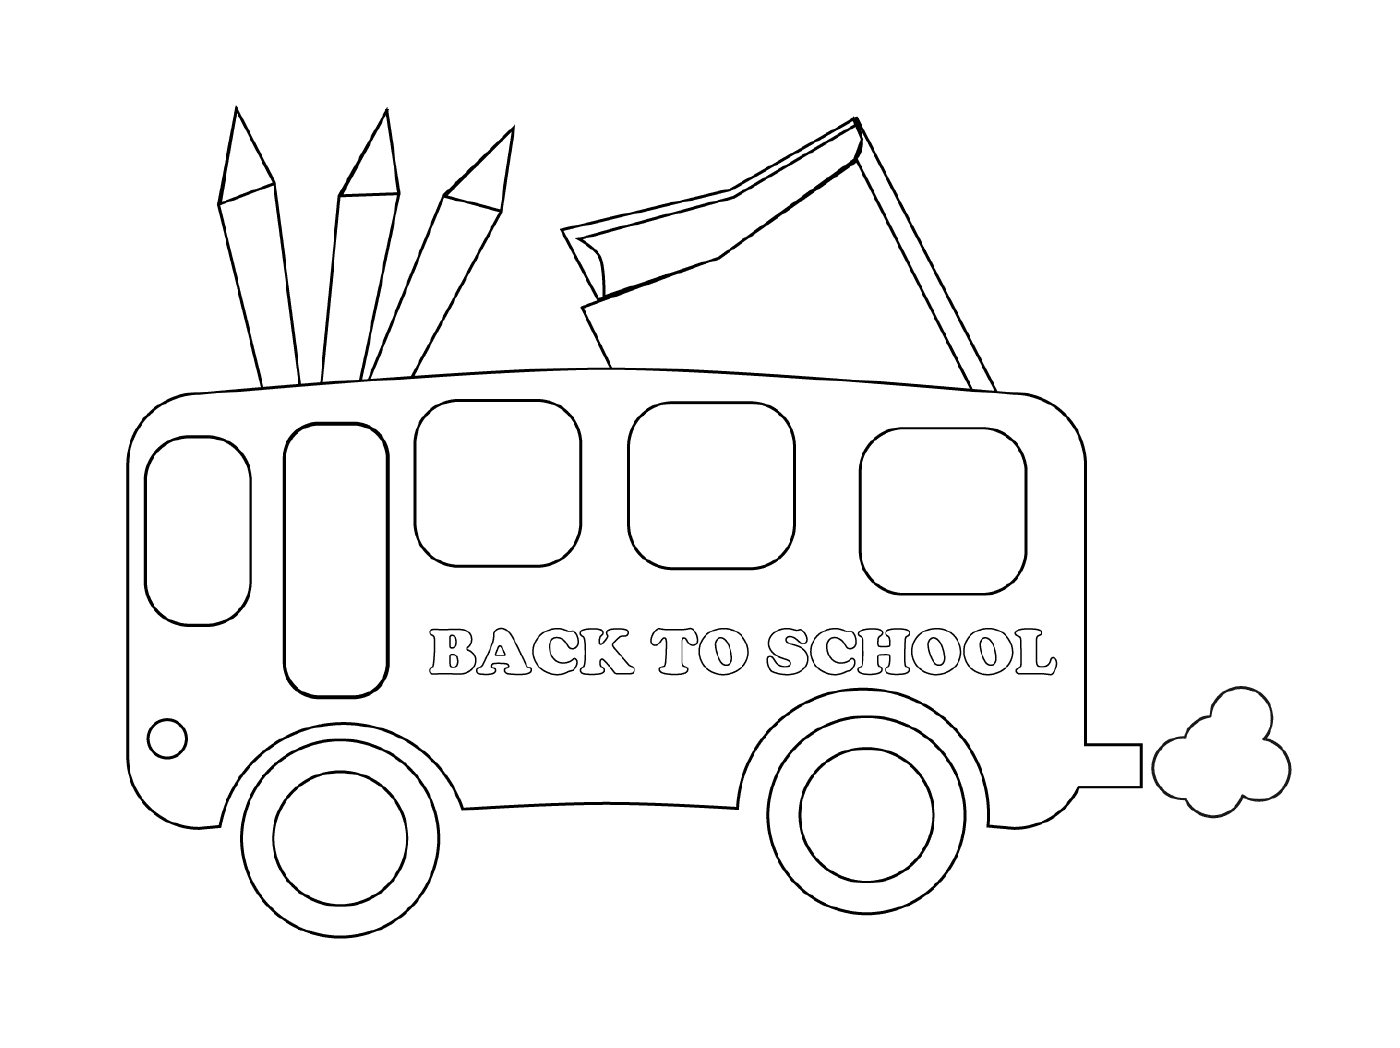  Back-to-school bus 